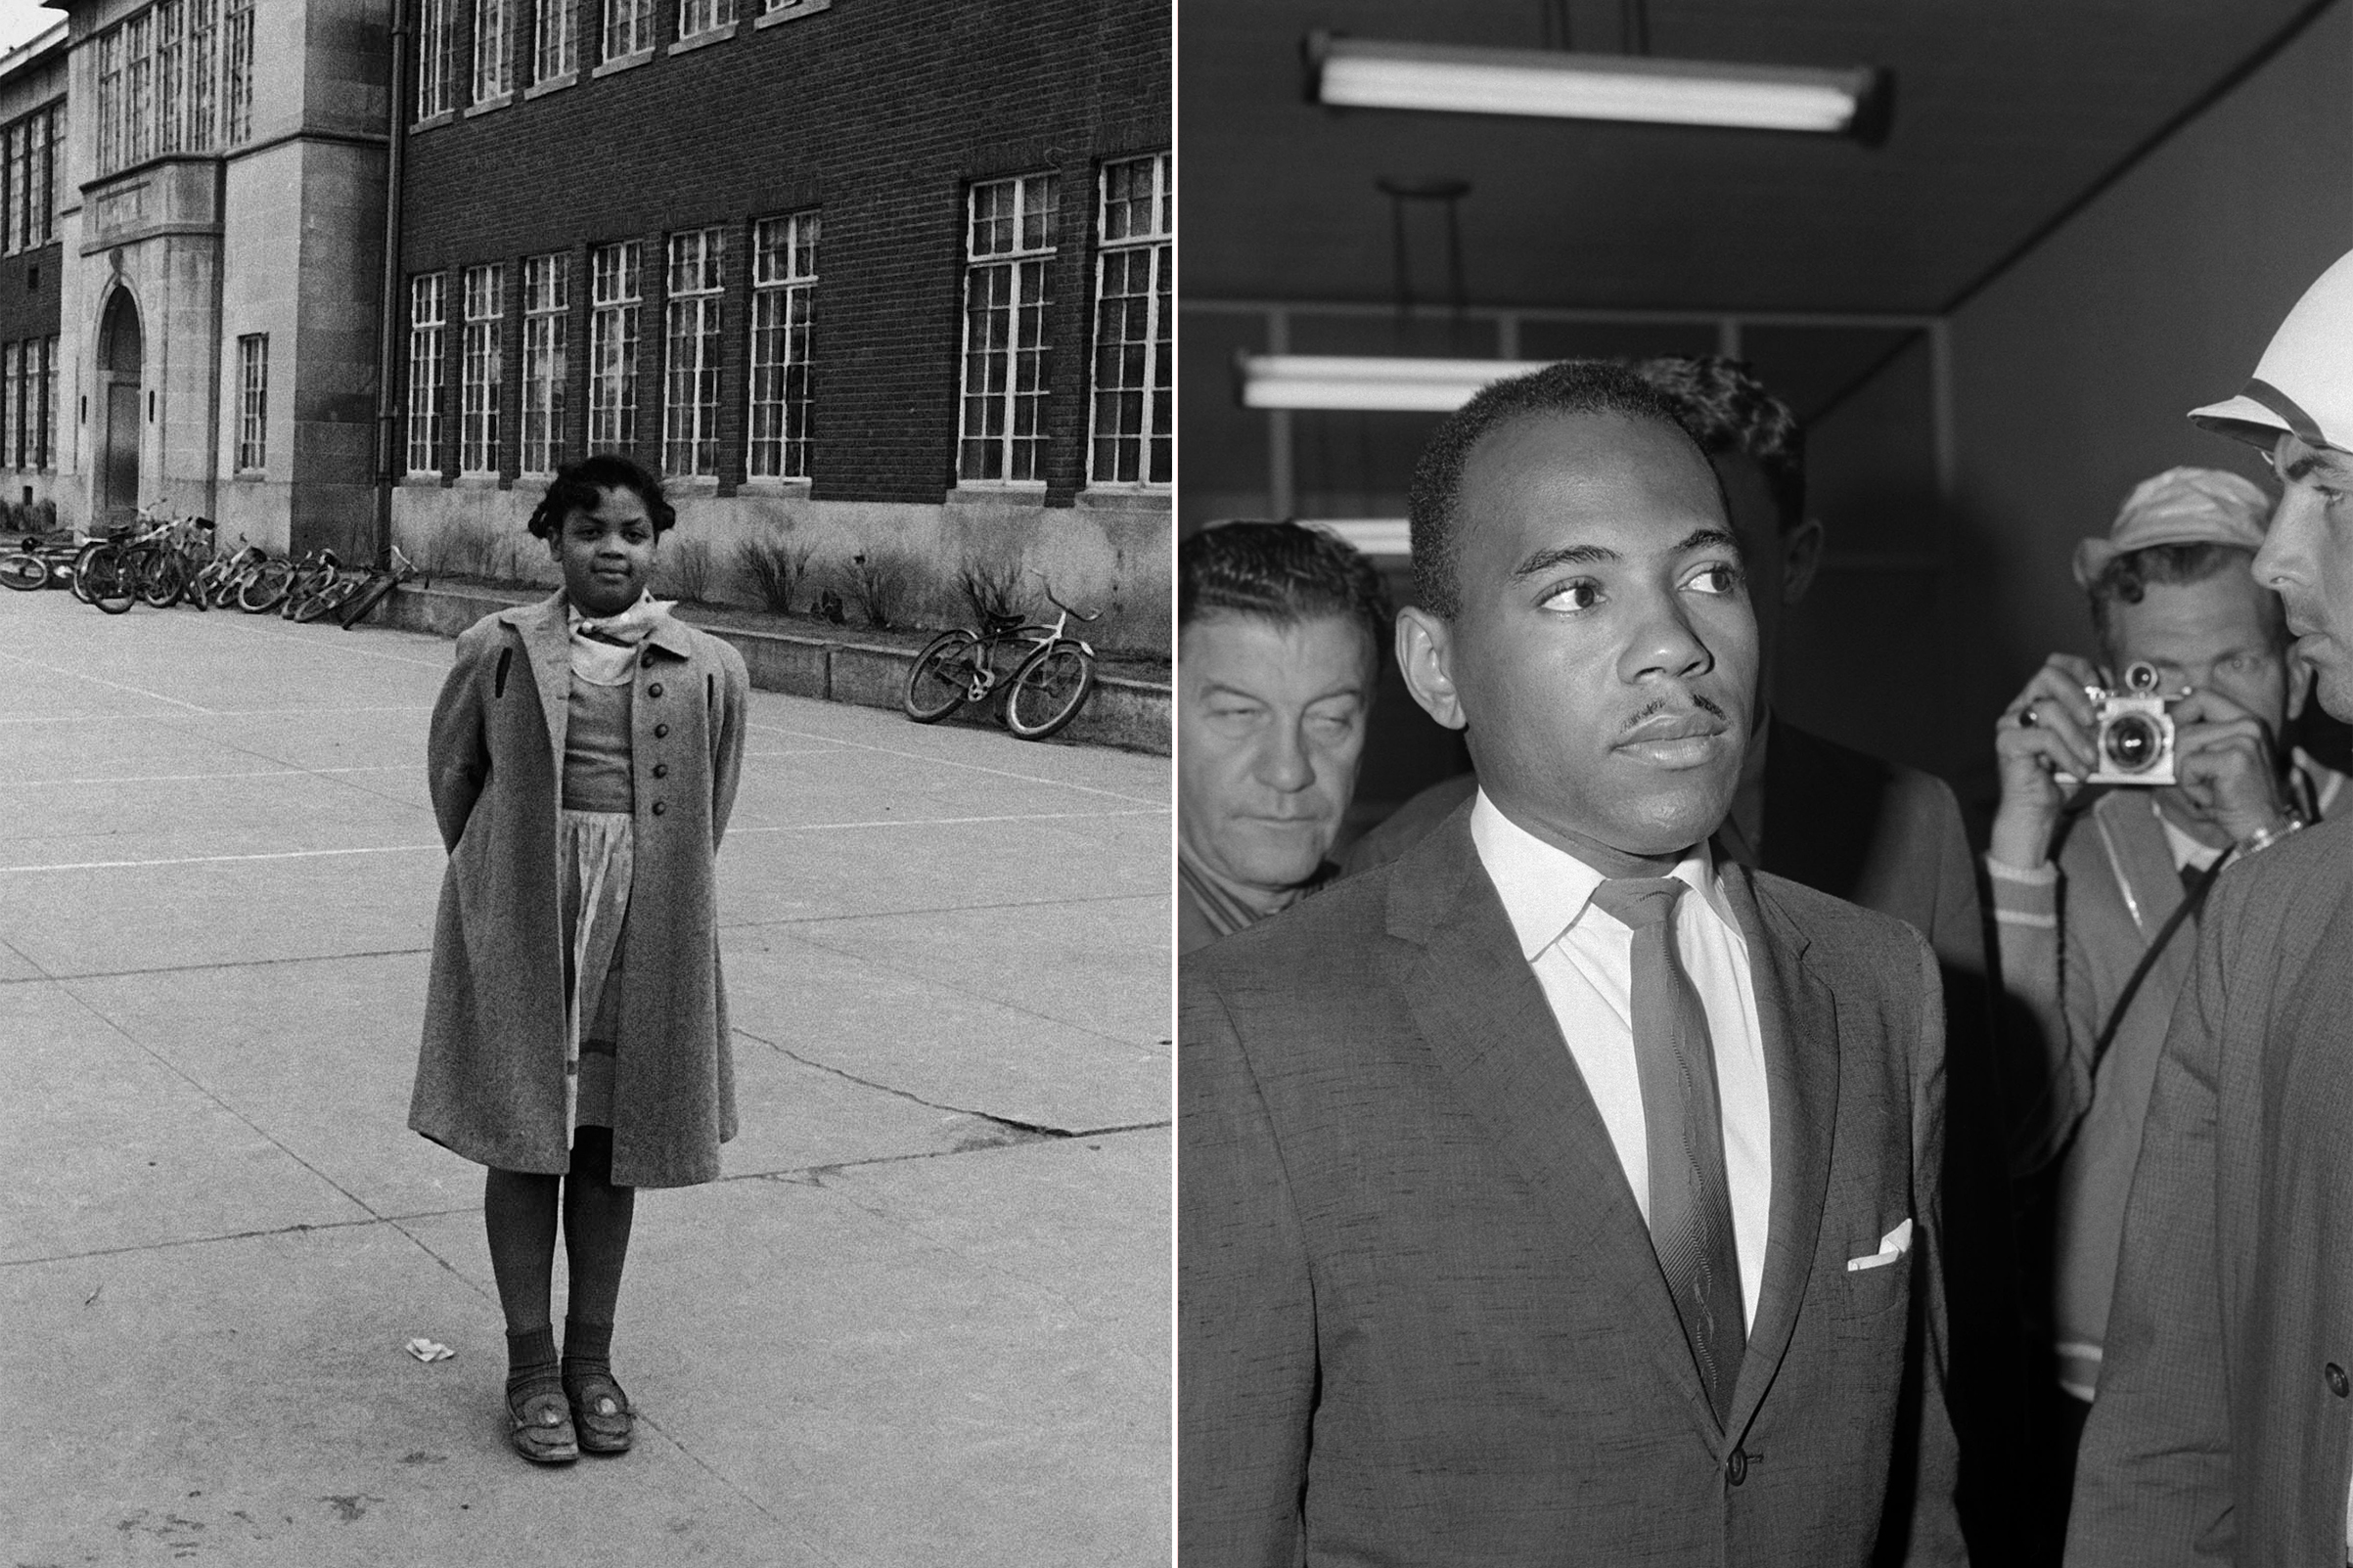 Linda Brown, at the center of Brown v. Board of Education; James Meredith, first African American to attend all-white Ole Miss in 1962. (Meredith: Getty Images; Brown: The LIFE Images Collection/Getty Images)